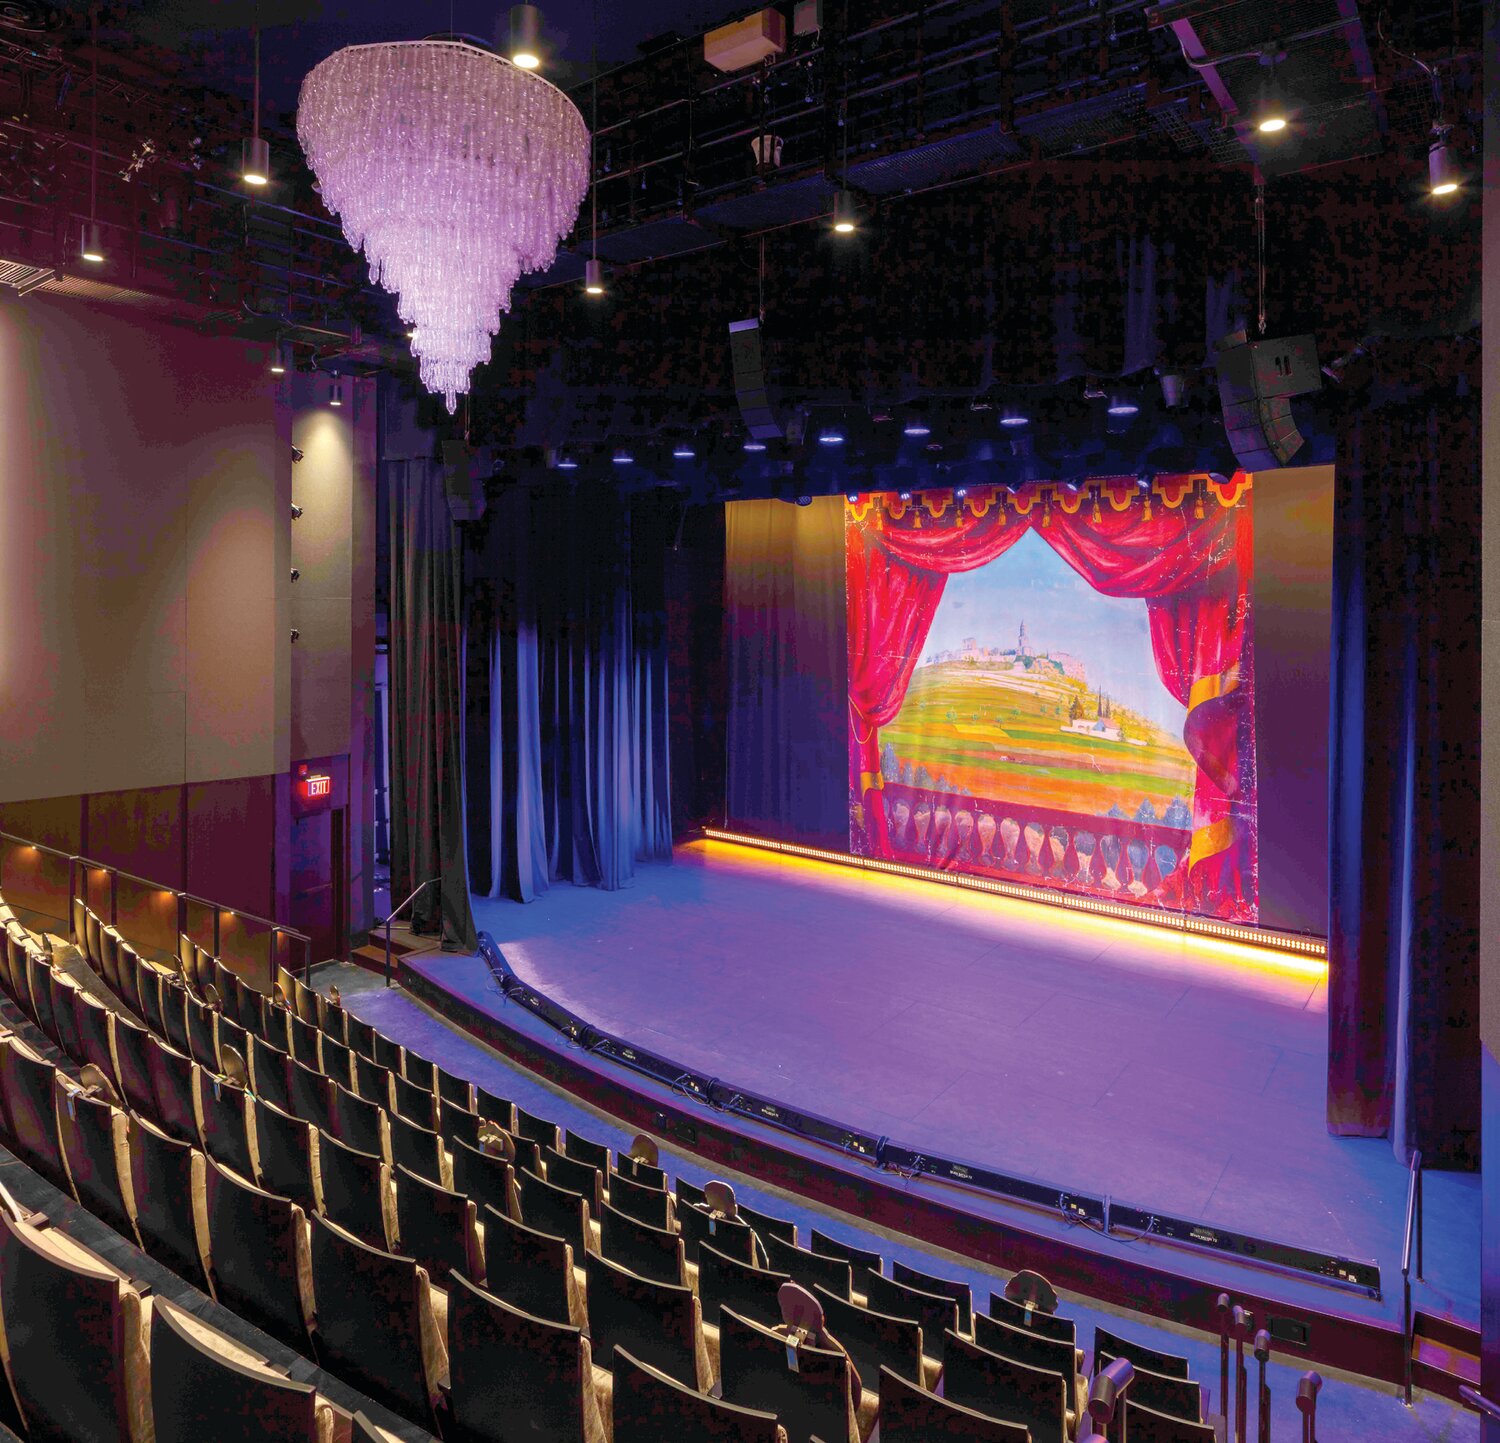 The 162-seat McDonnell Theater offers an intimate, yet state-of-the-art performing arts space at ArtYard in Frenchtown.